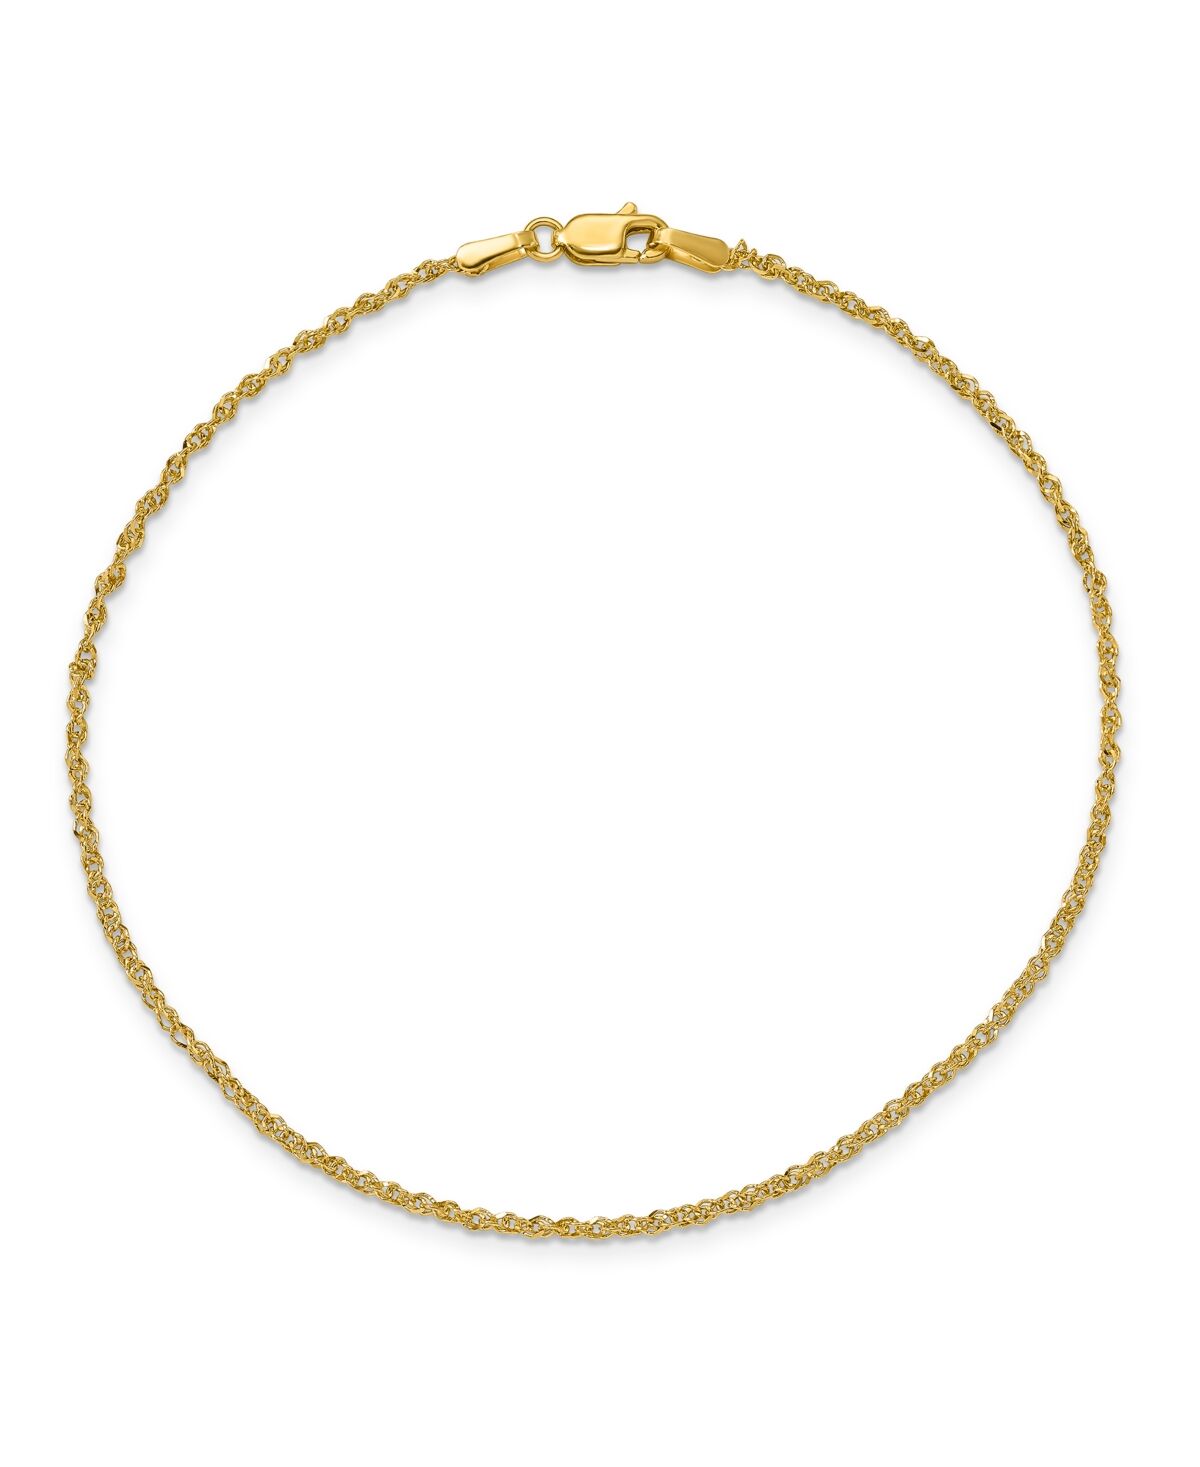 Macy's Ropa Anklet in 14k Yellow Gold - Gold